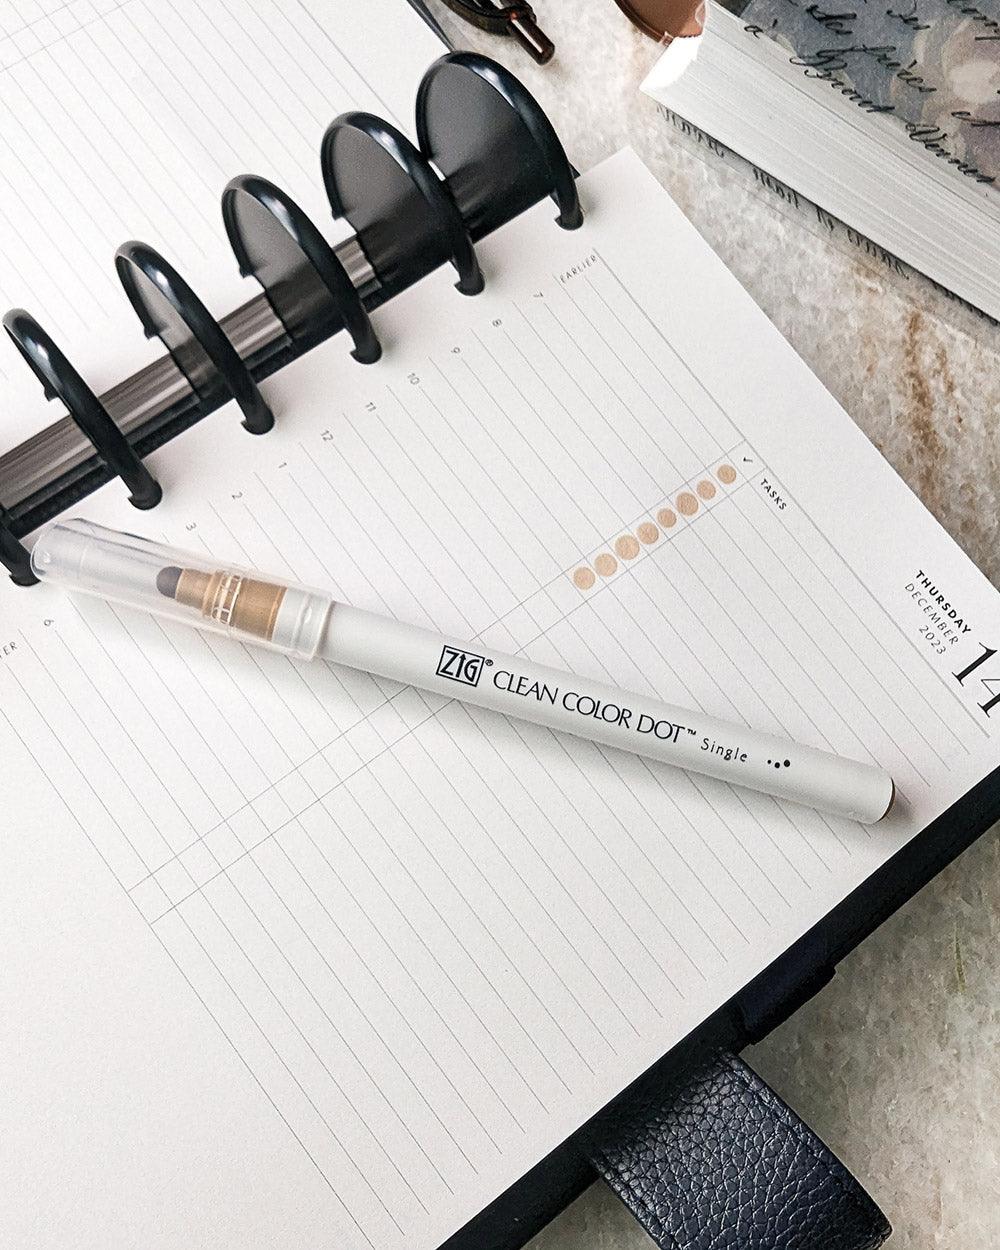 ZIG brand color dot highlighting marker in a beige oatmeal color for planning in your discbound or six ring planner systems and disc notebooks by Jane's Agenda.